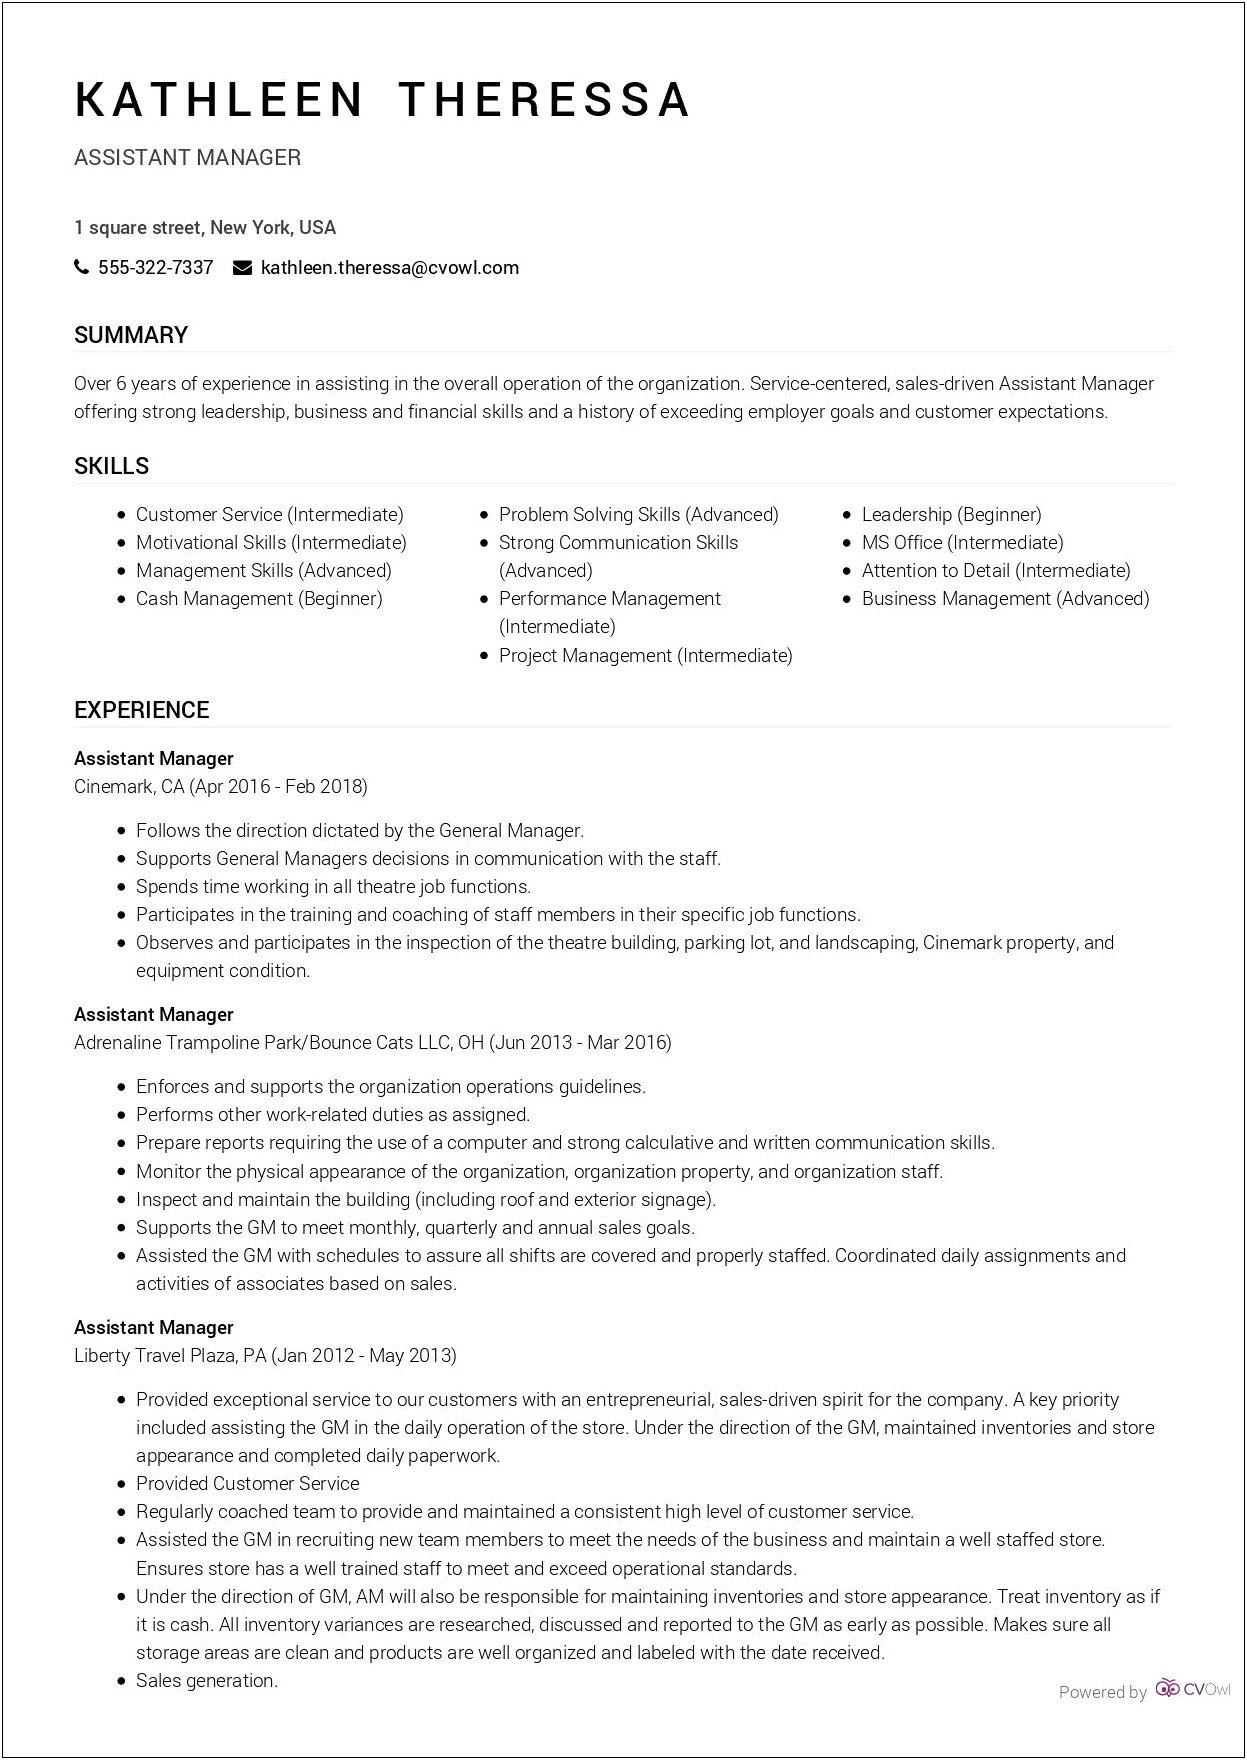 Resume For Assistant Manager Hr